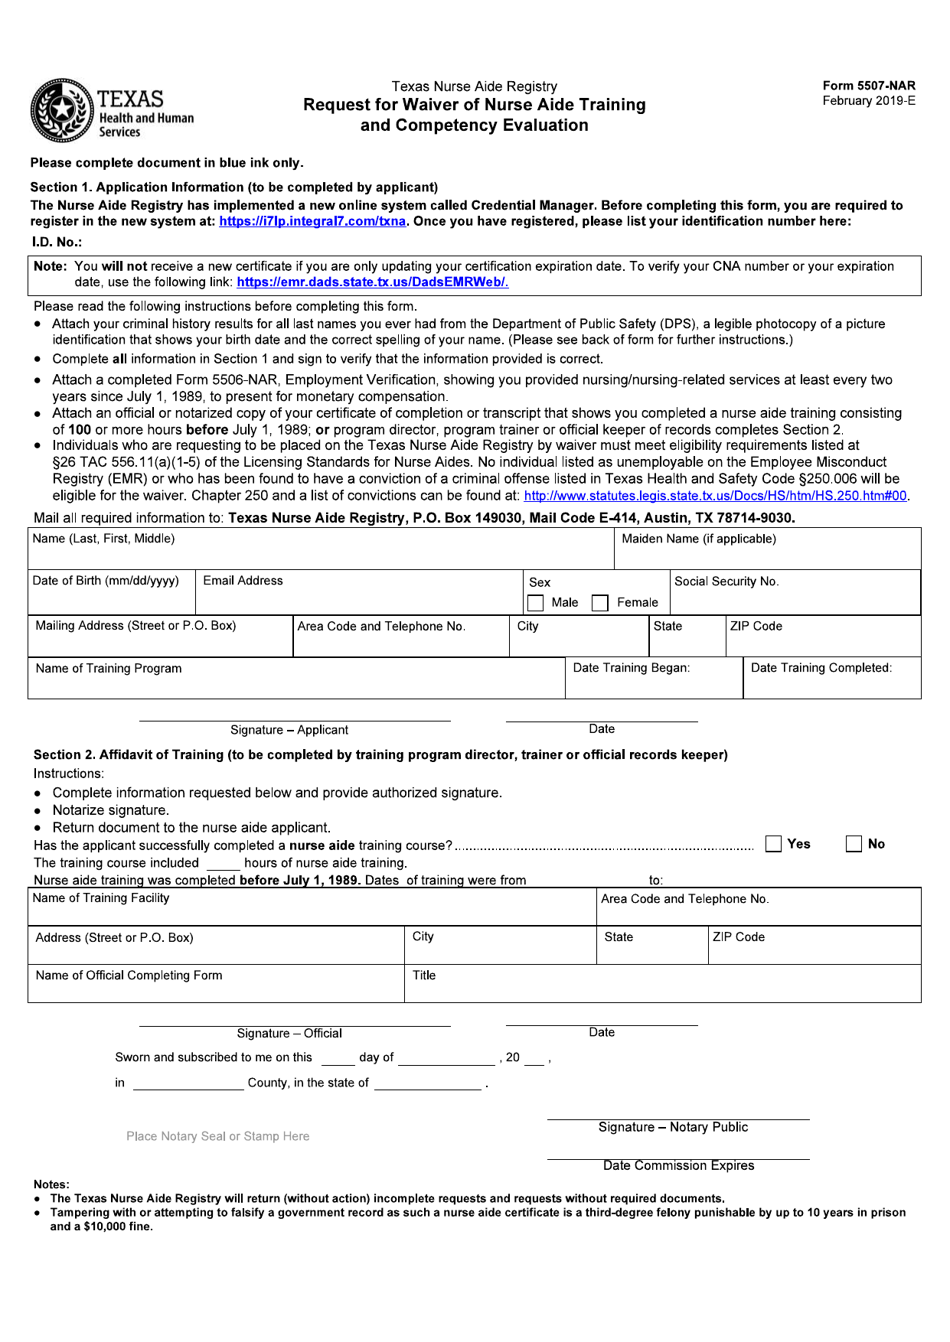 Form 5507-NAR Request for Waiver of Nurse Aide Training and Competency Evaluation - Texas, Page 1